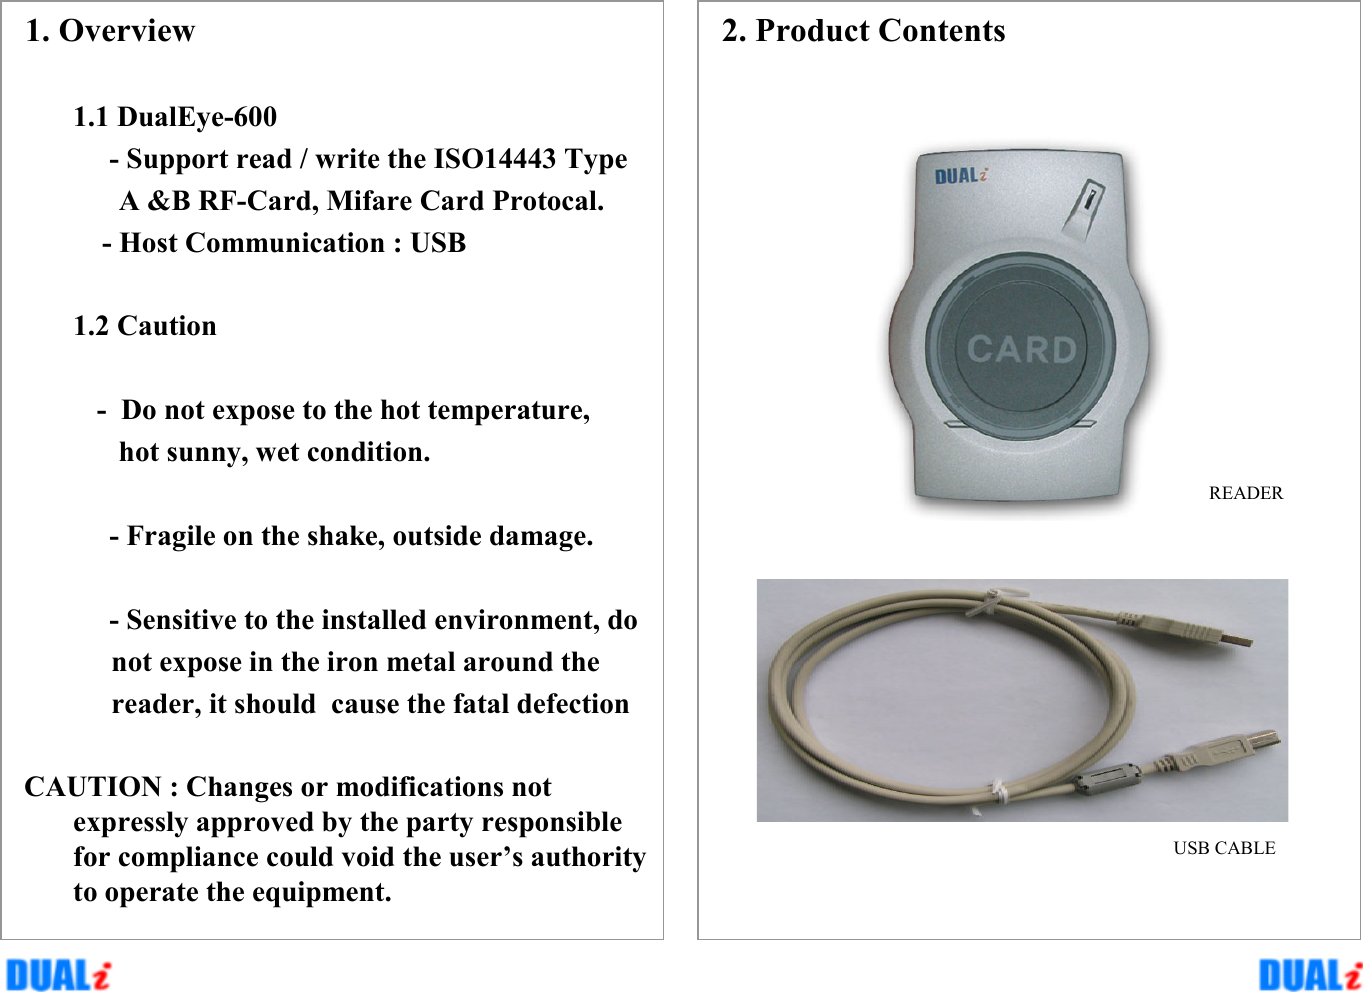 2. Product ContentsREADERUSB CABLE1. Overview1.1 DualEye-600- Support read / write the ISO14443 TypeA &amp;B RF-Card, Mifare Card Protocal.- Host Communication : USB1.2 Caution- Do not expose to the hot temperature, hot sunny, wet condition.- Fragile on the shake, outside damage.- Sensitive to the installed environment, do not expose in the iron metal around thereader, it should  cause the fatal defectionCAUTION : Changes or modifications not expressly approved by the party responsible for compliance could void the user’s authority to operate the equipment.